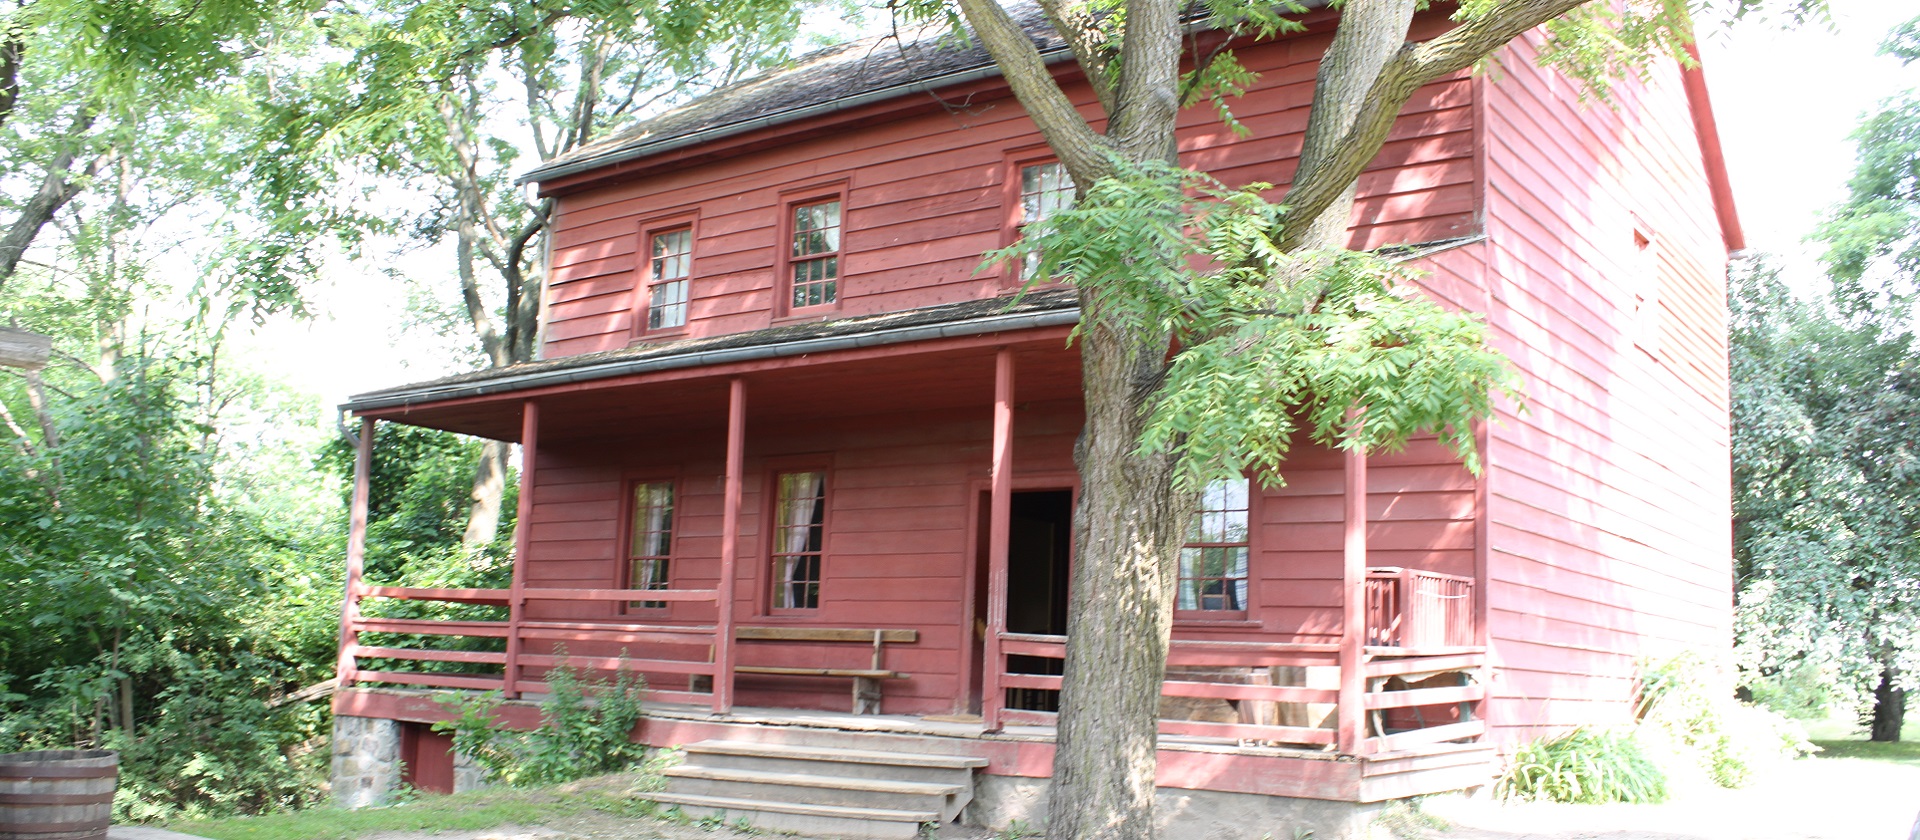 The Daniel Stong second house at Black Creek Pioneer Village